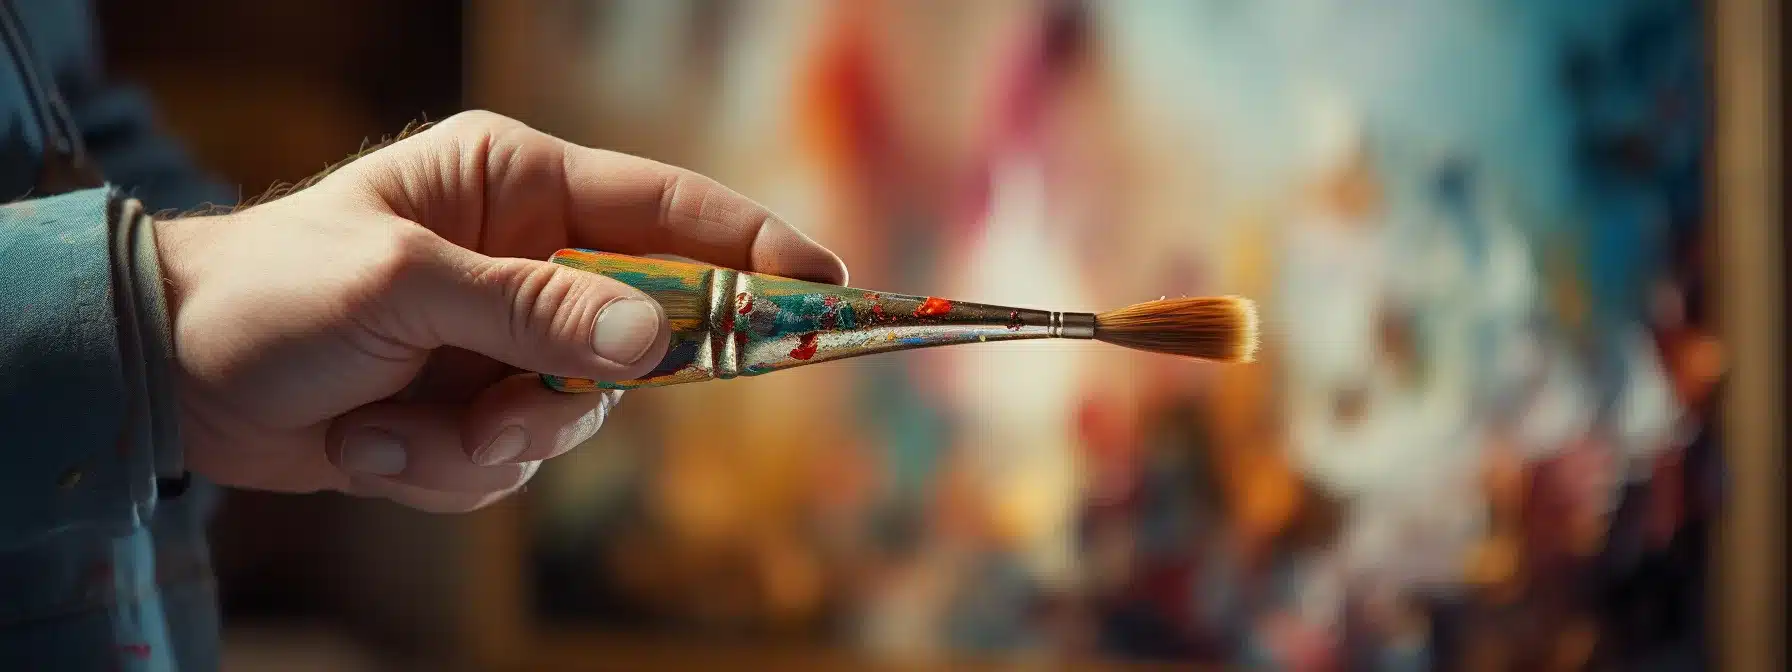 A Person Holding A Paintbrush Adjusting A Painting.